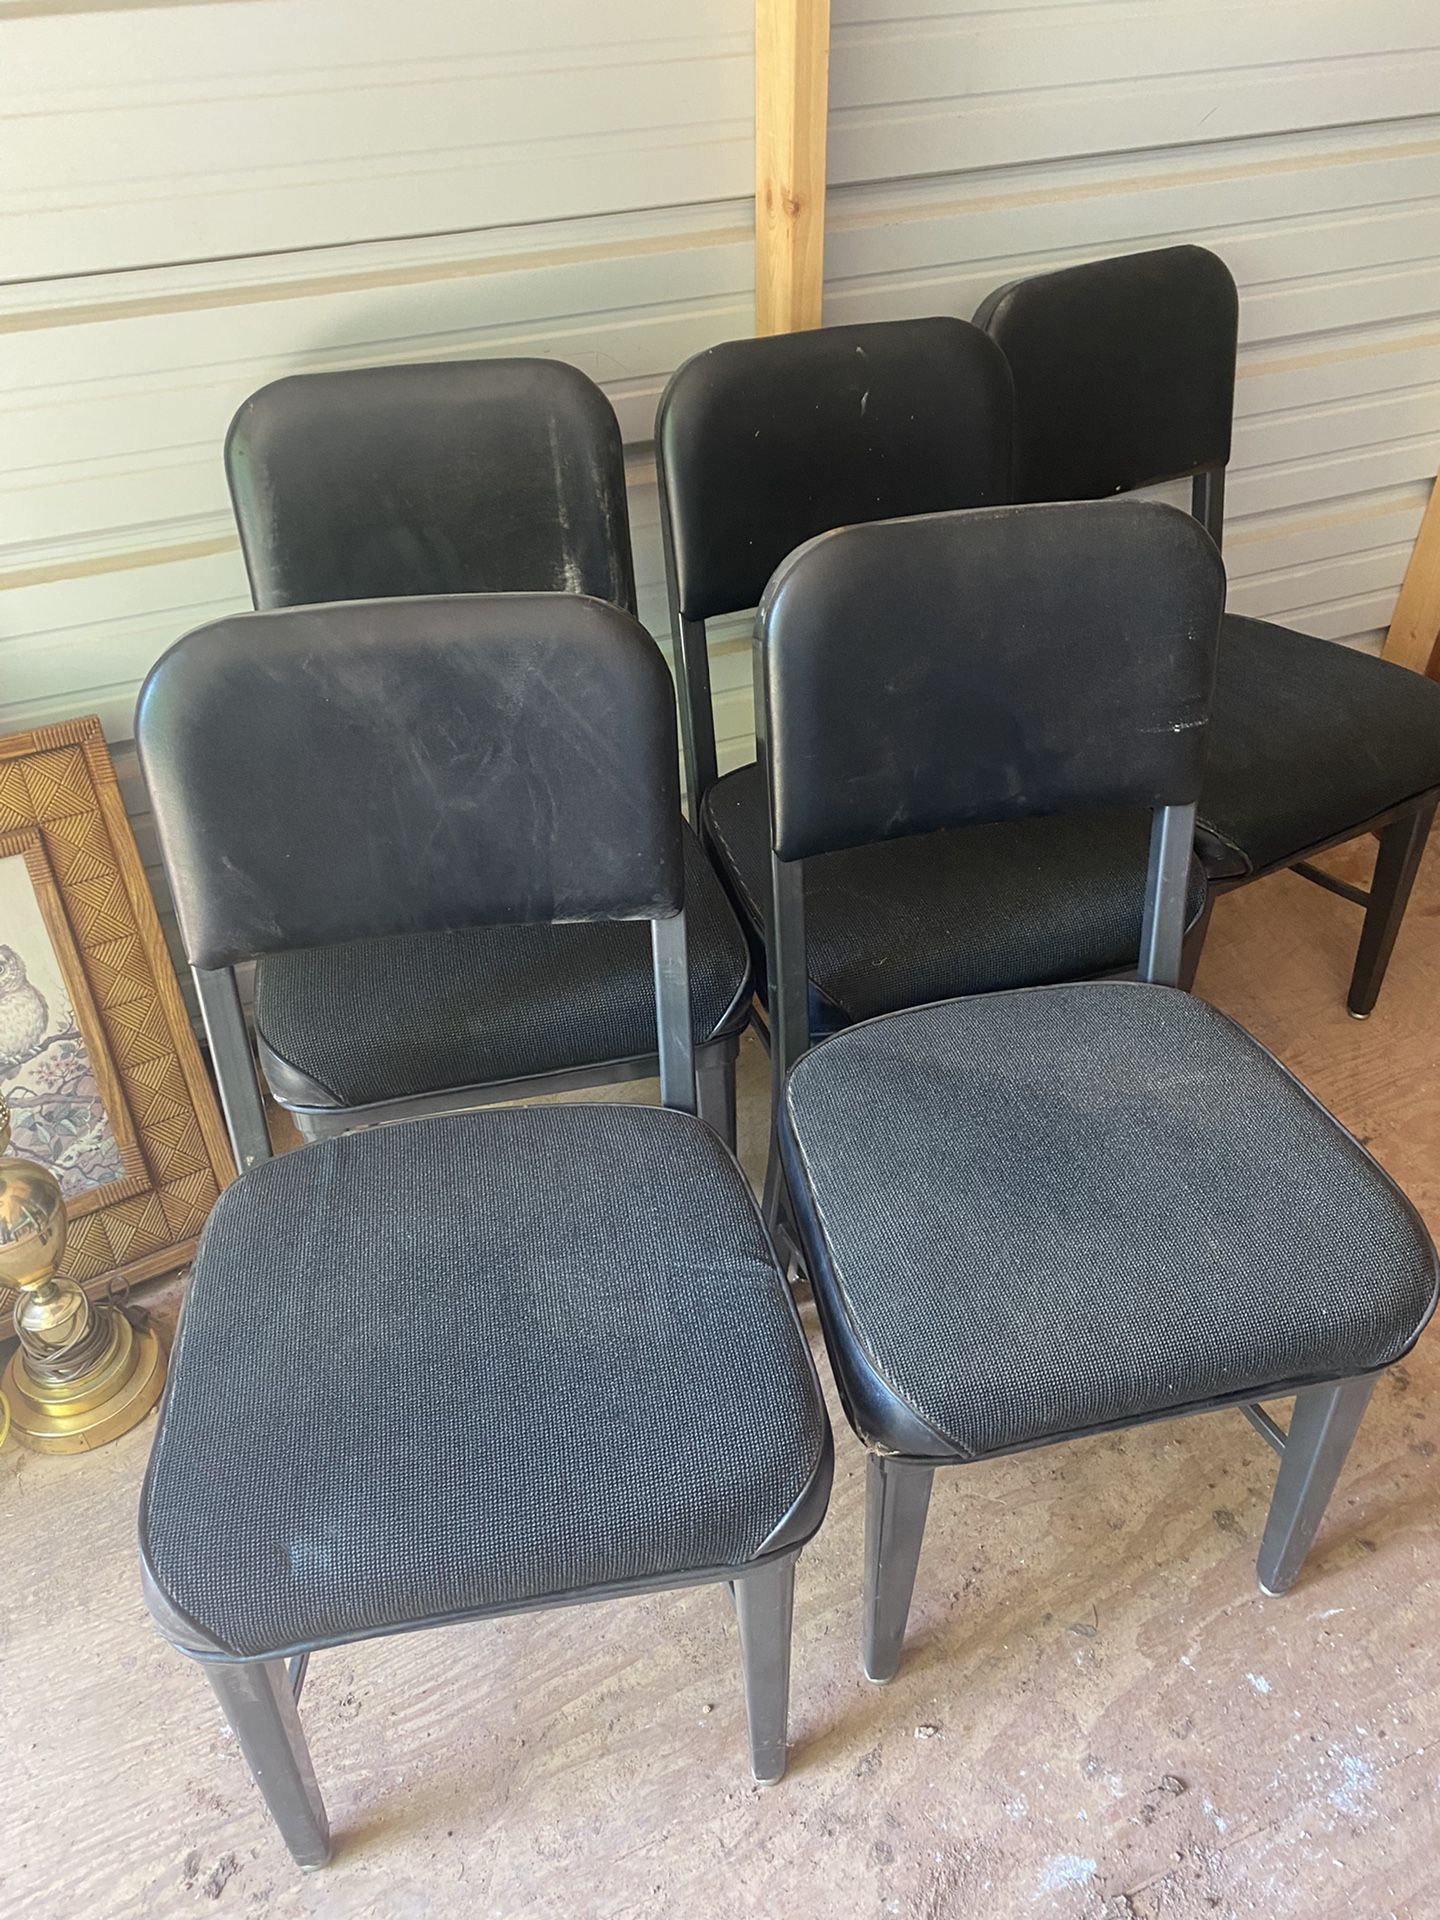 5 Chairs One Money 